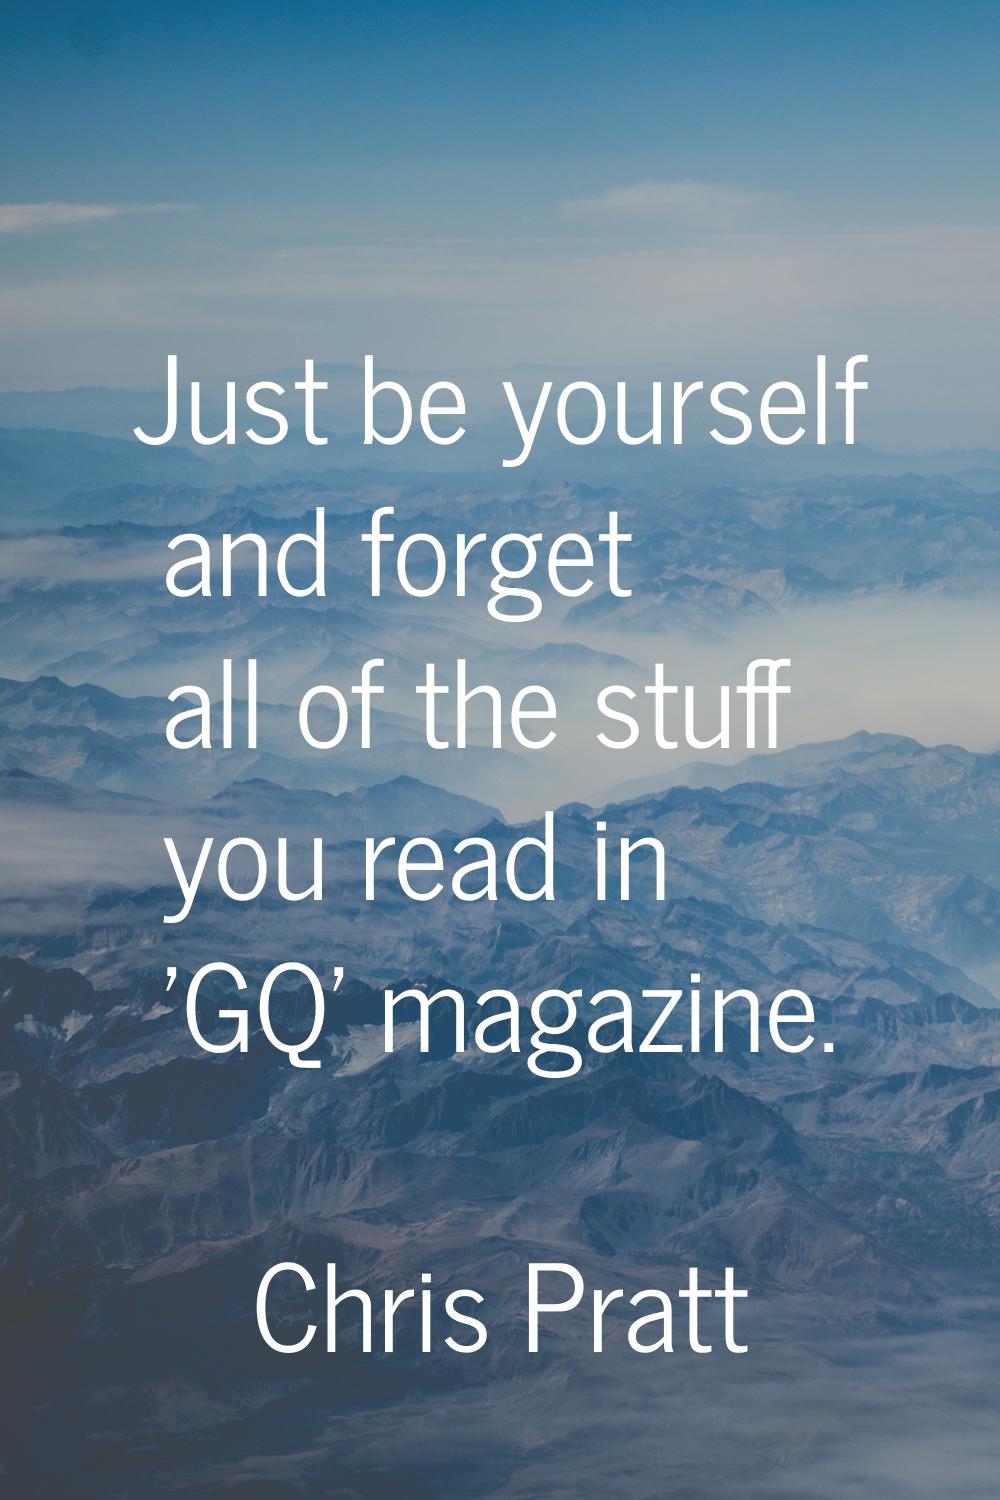 Just be yourself and forget all of the stuff you read in 'GQ' magazine.